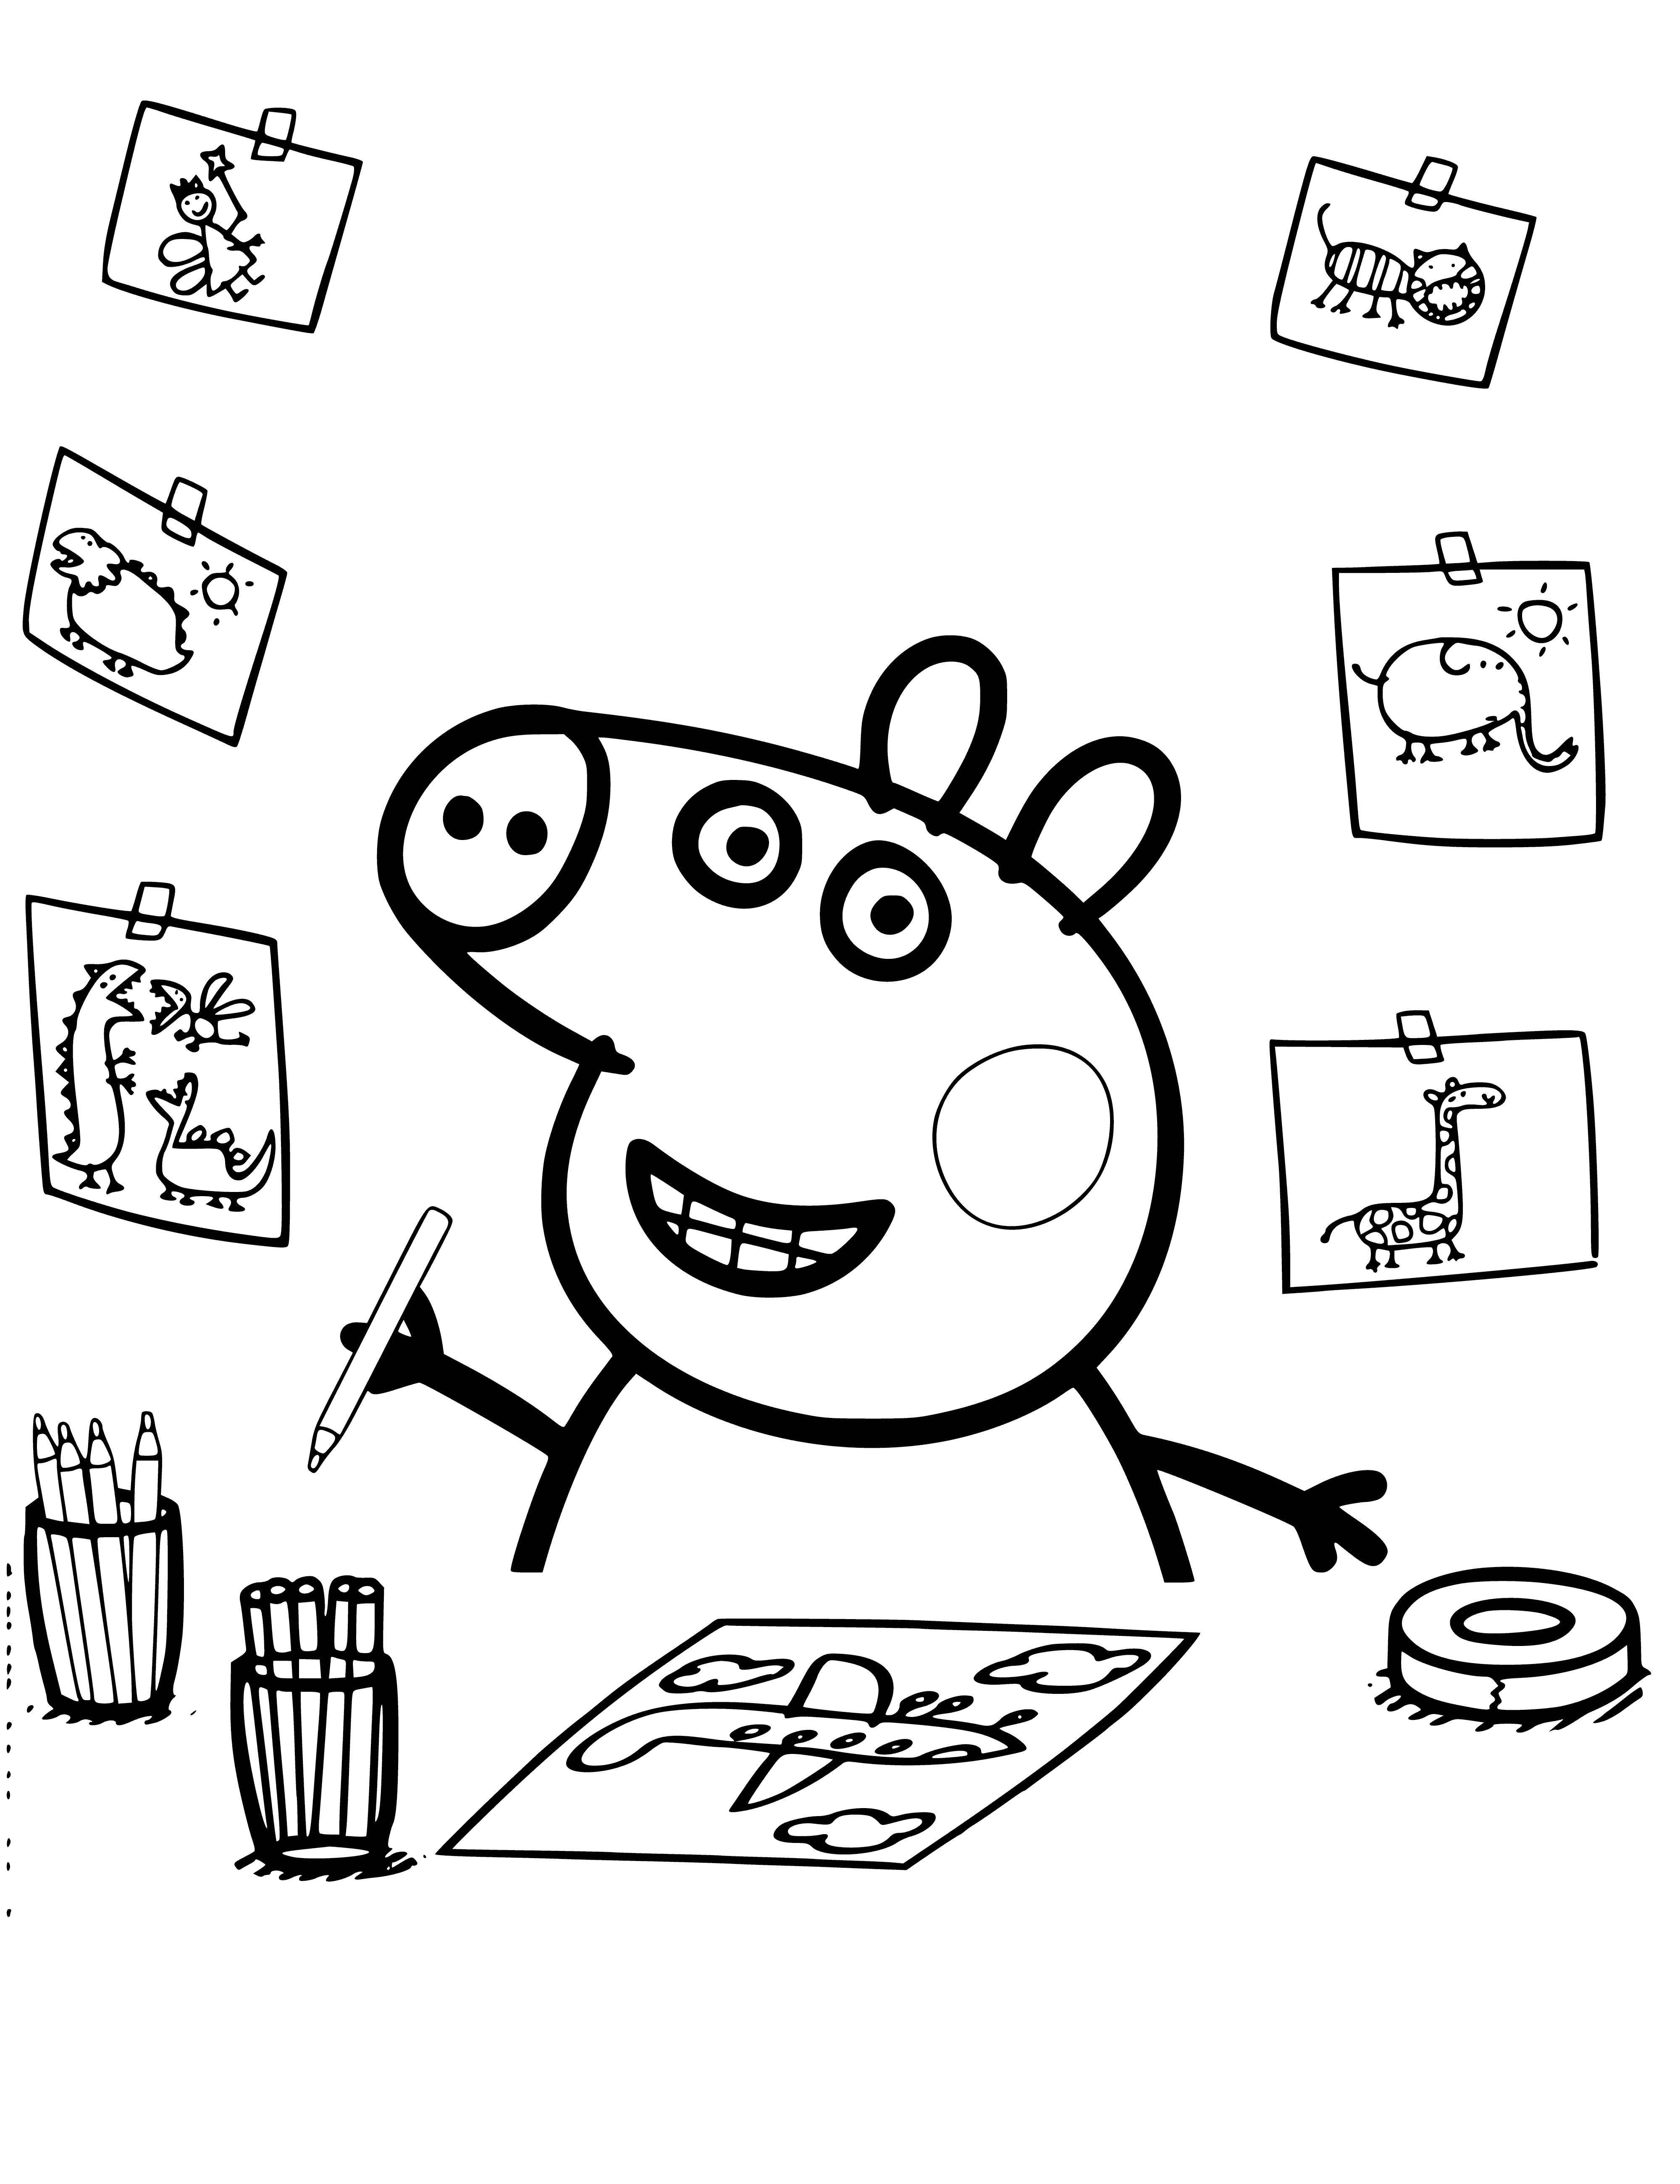 coloring page: Peppa Pig is drawing a happy face with a yellow pencil, concentrating hard.